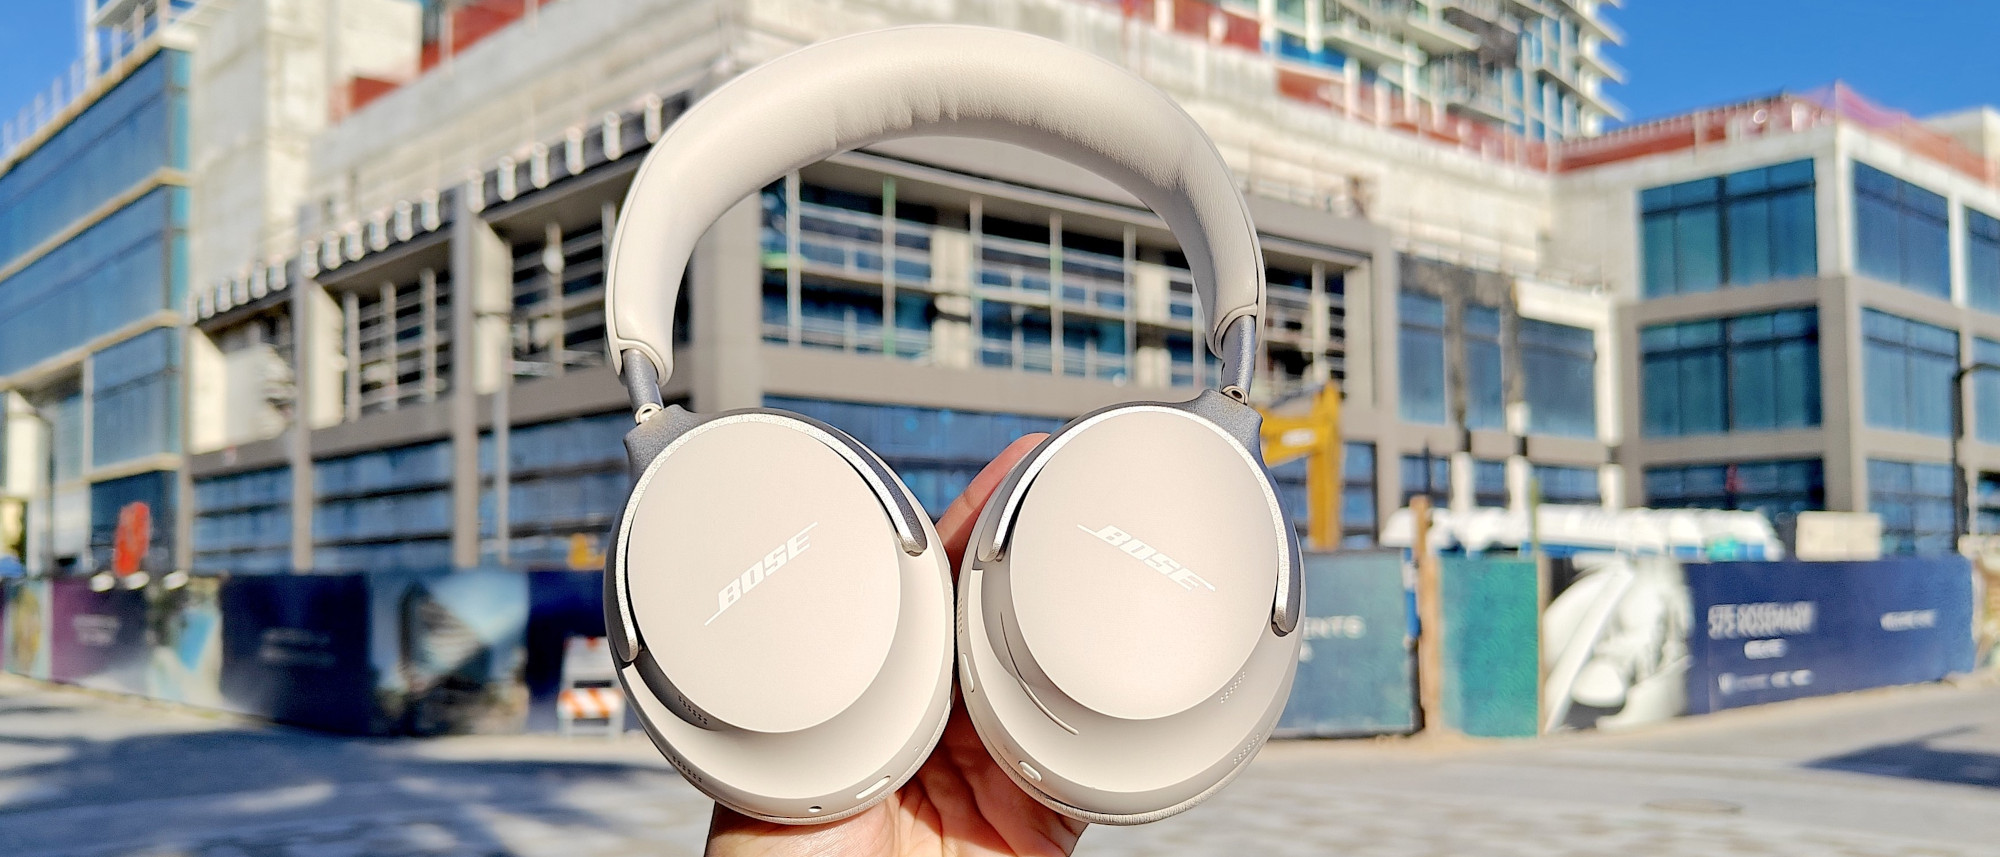 Bose QuietComfort Ultra Headphones review: Taking it to the max